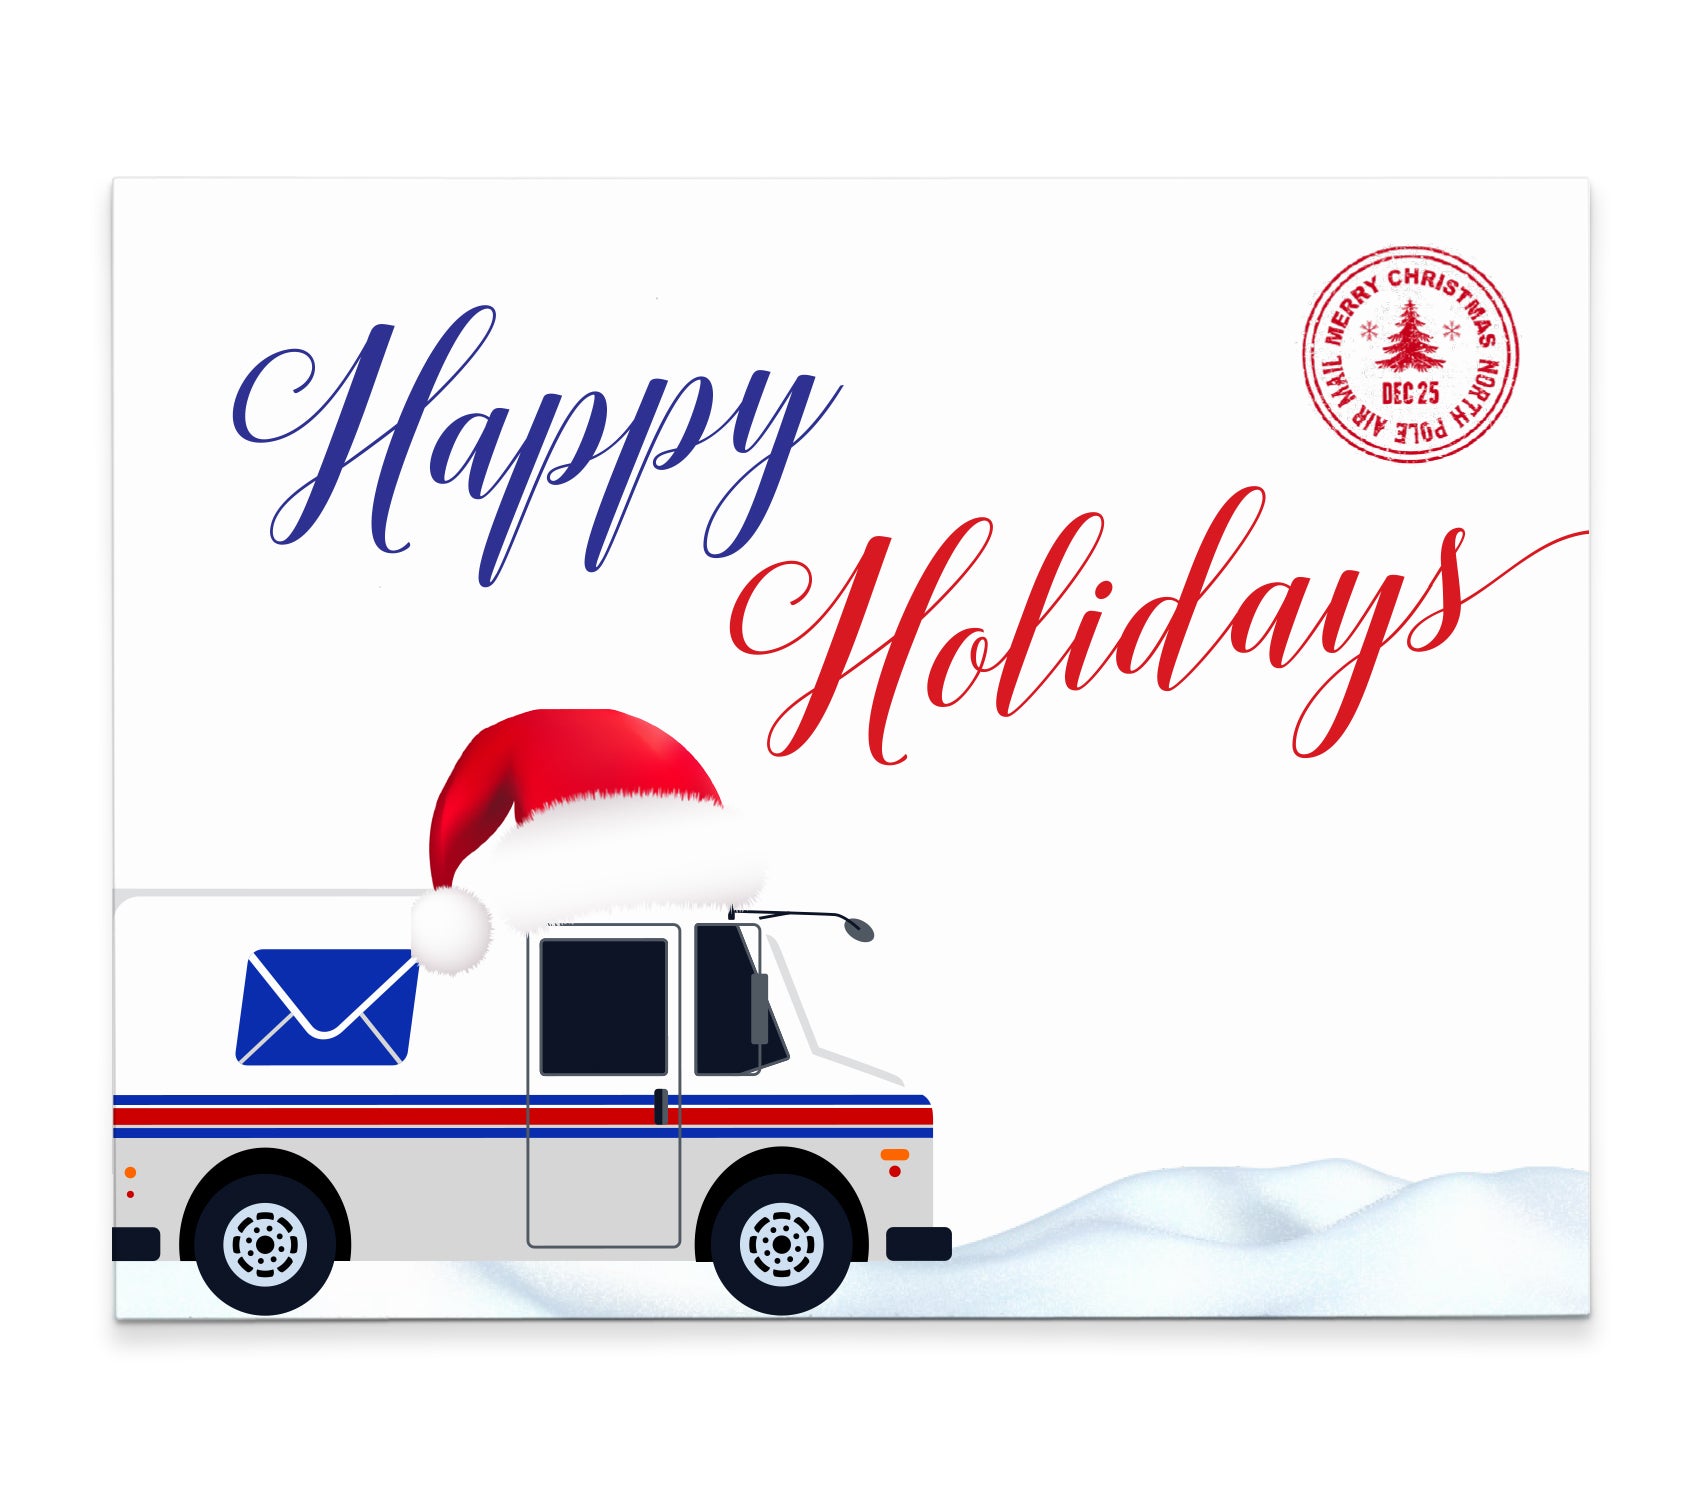    HGC013 Holiday Postal  Thank You Cards-with-Postal Truck usps snow santa hat postcards